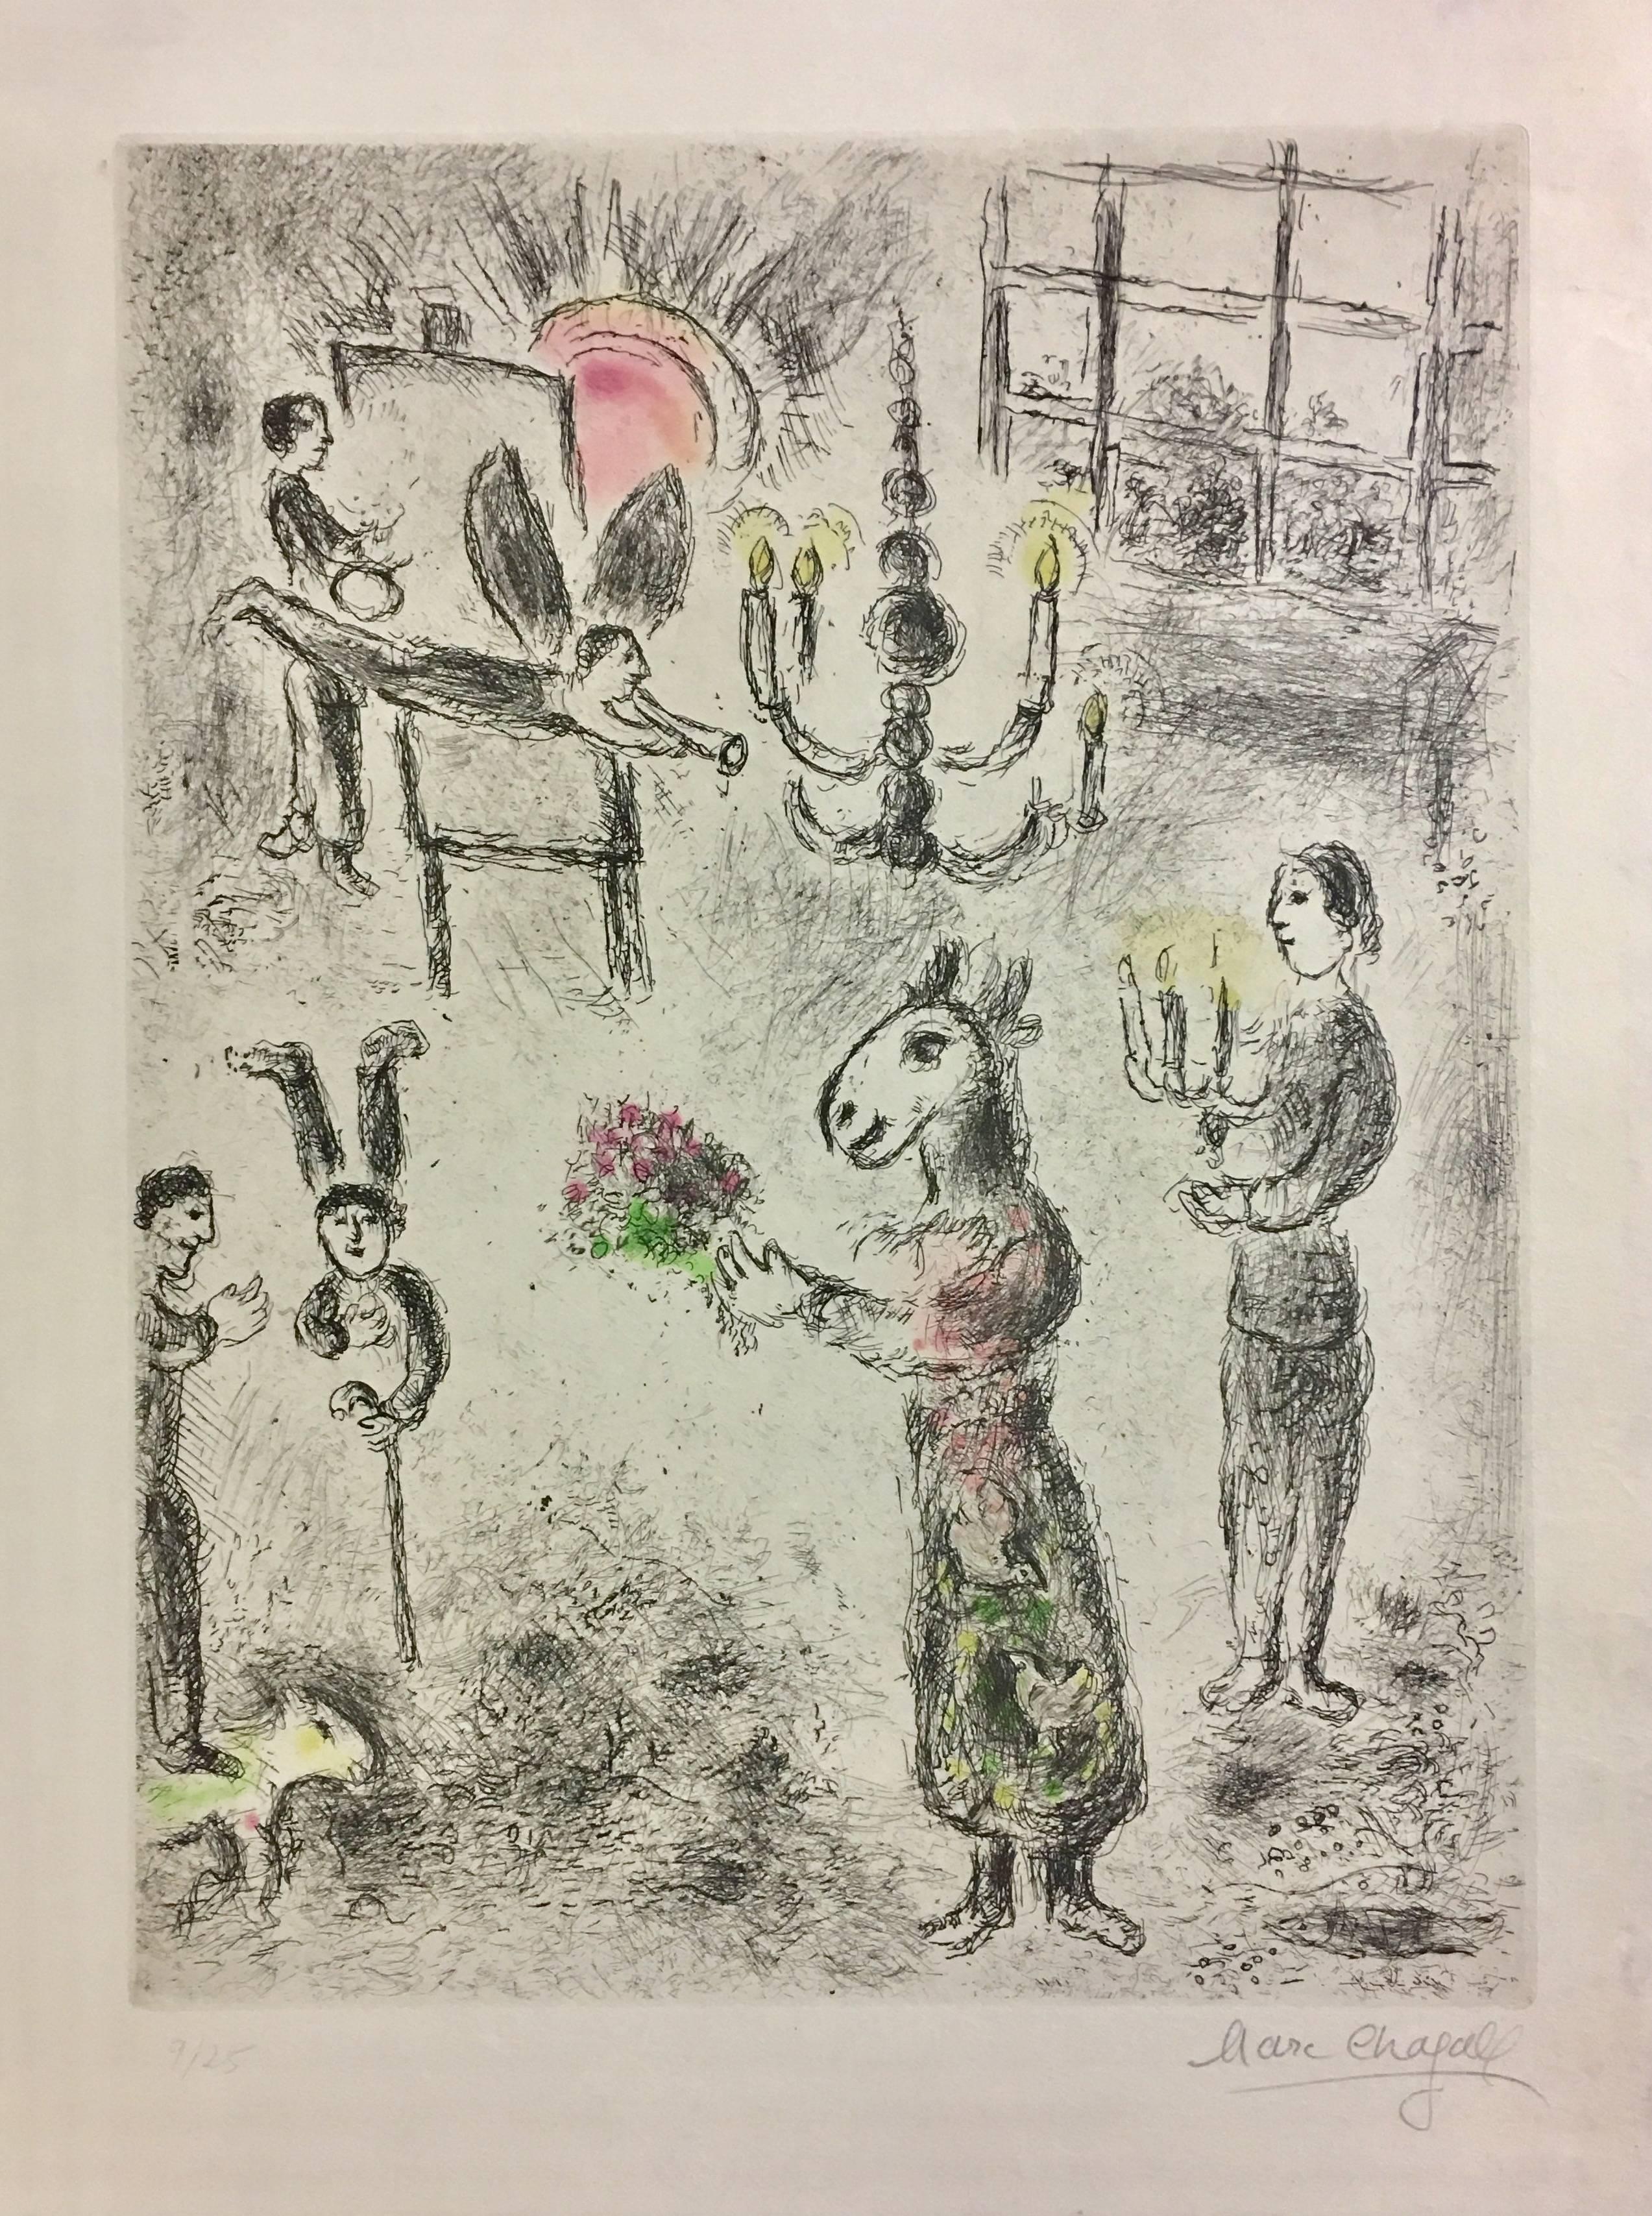 This piece is an original color etching and aquatint by Marc Chagall.  It is from the series of 26 pieces entitled "Celui Qui Dit les Choses sans Rien Dire", which was created in 1975-76. 
This piece is hand signed and numbered 9/25 from the edition